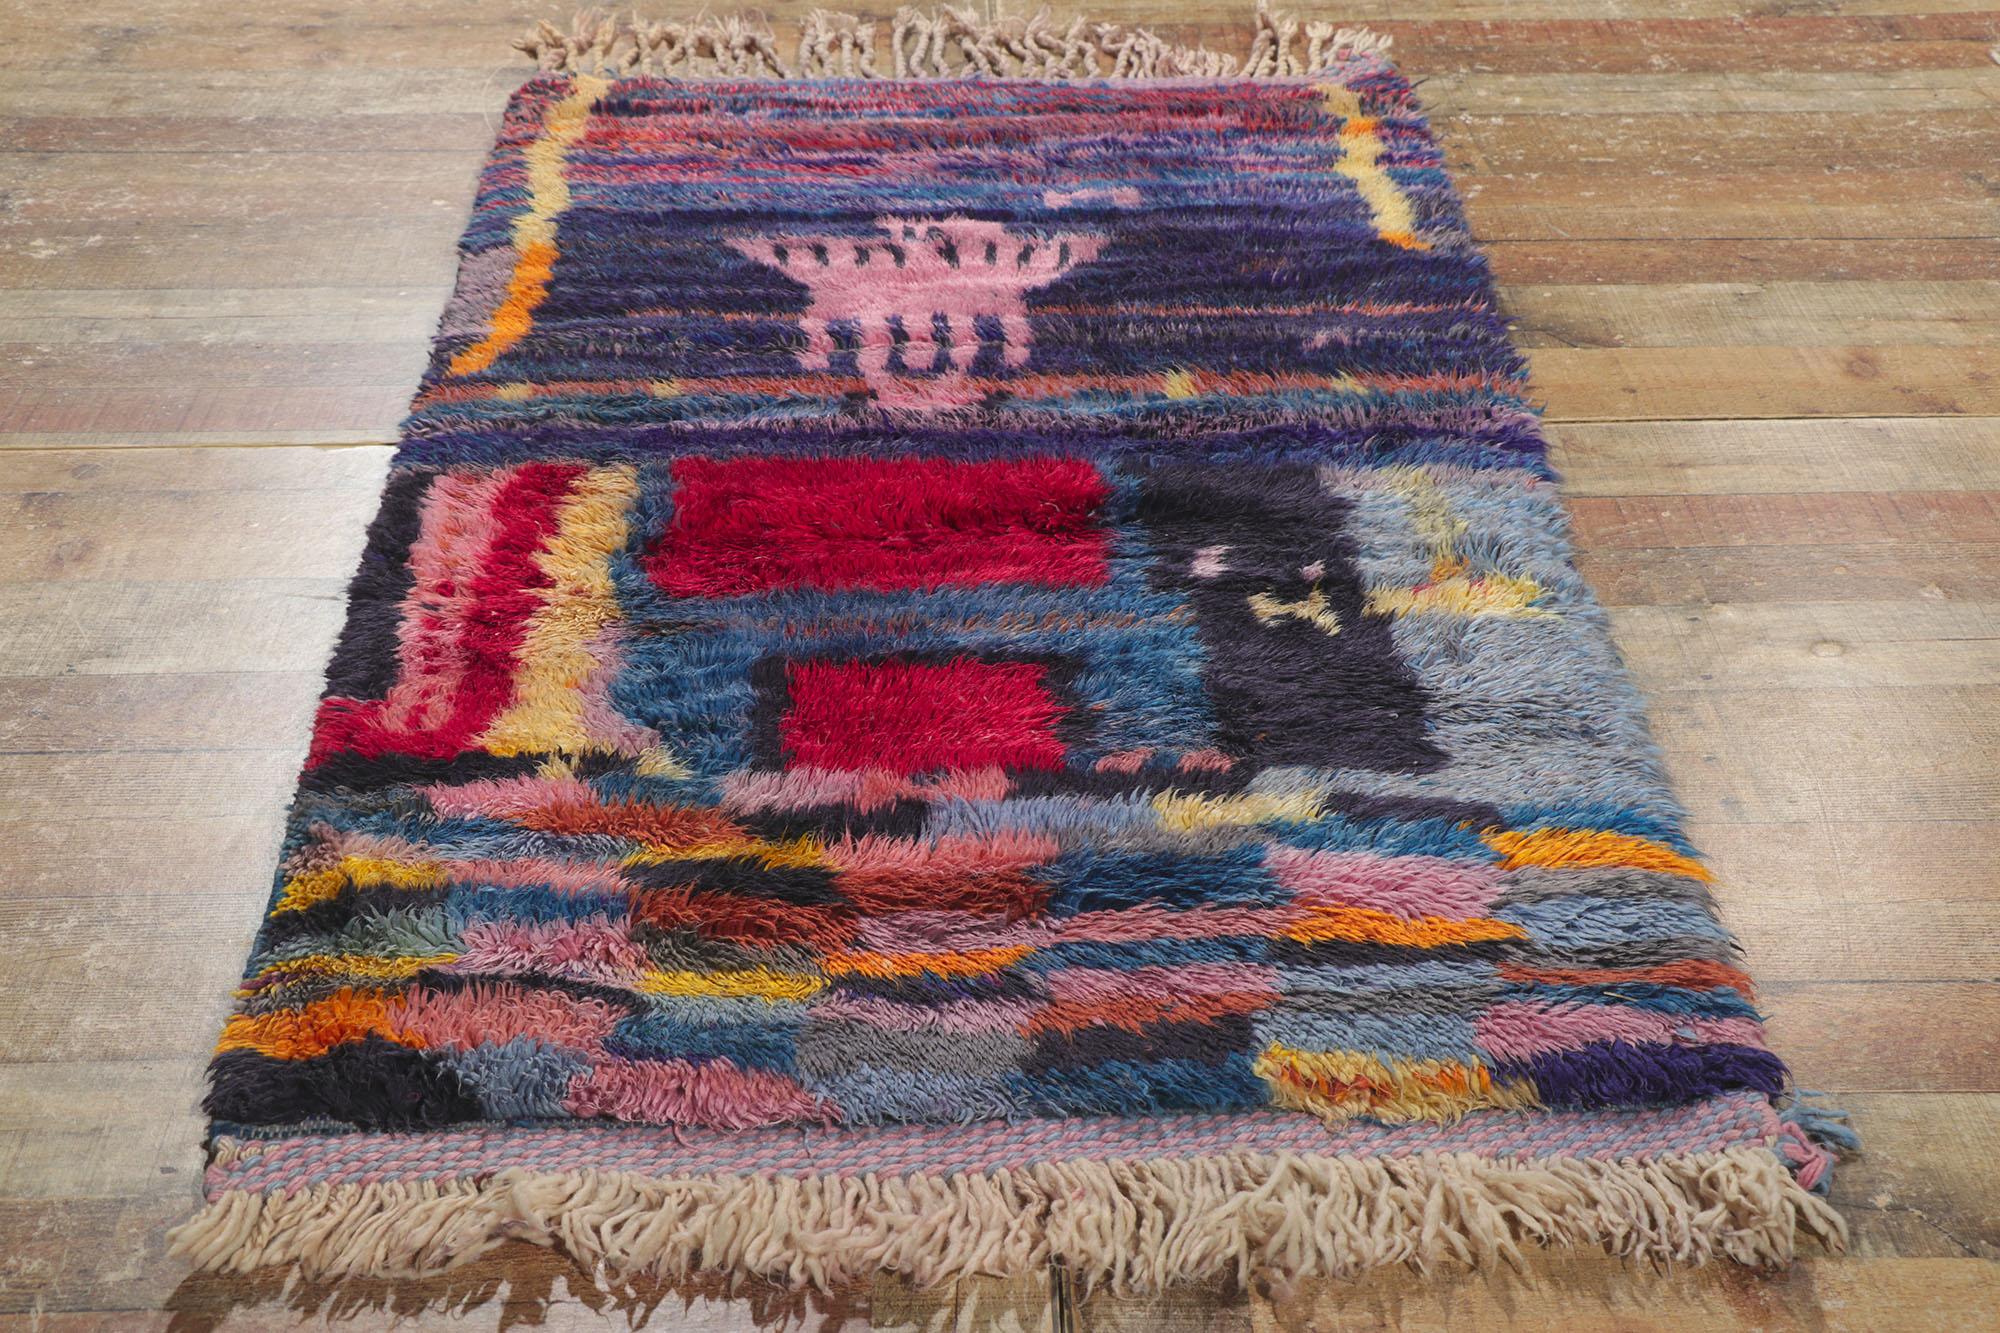 Contemporary Colorful Beni Ourain Moroccan Rug by Berber Tribes of Morocco For Sale 1